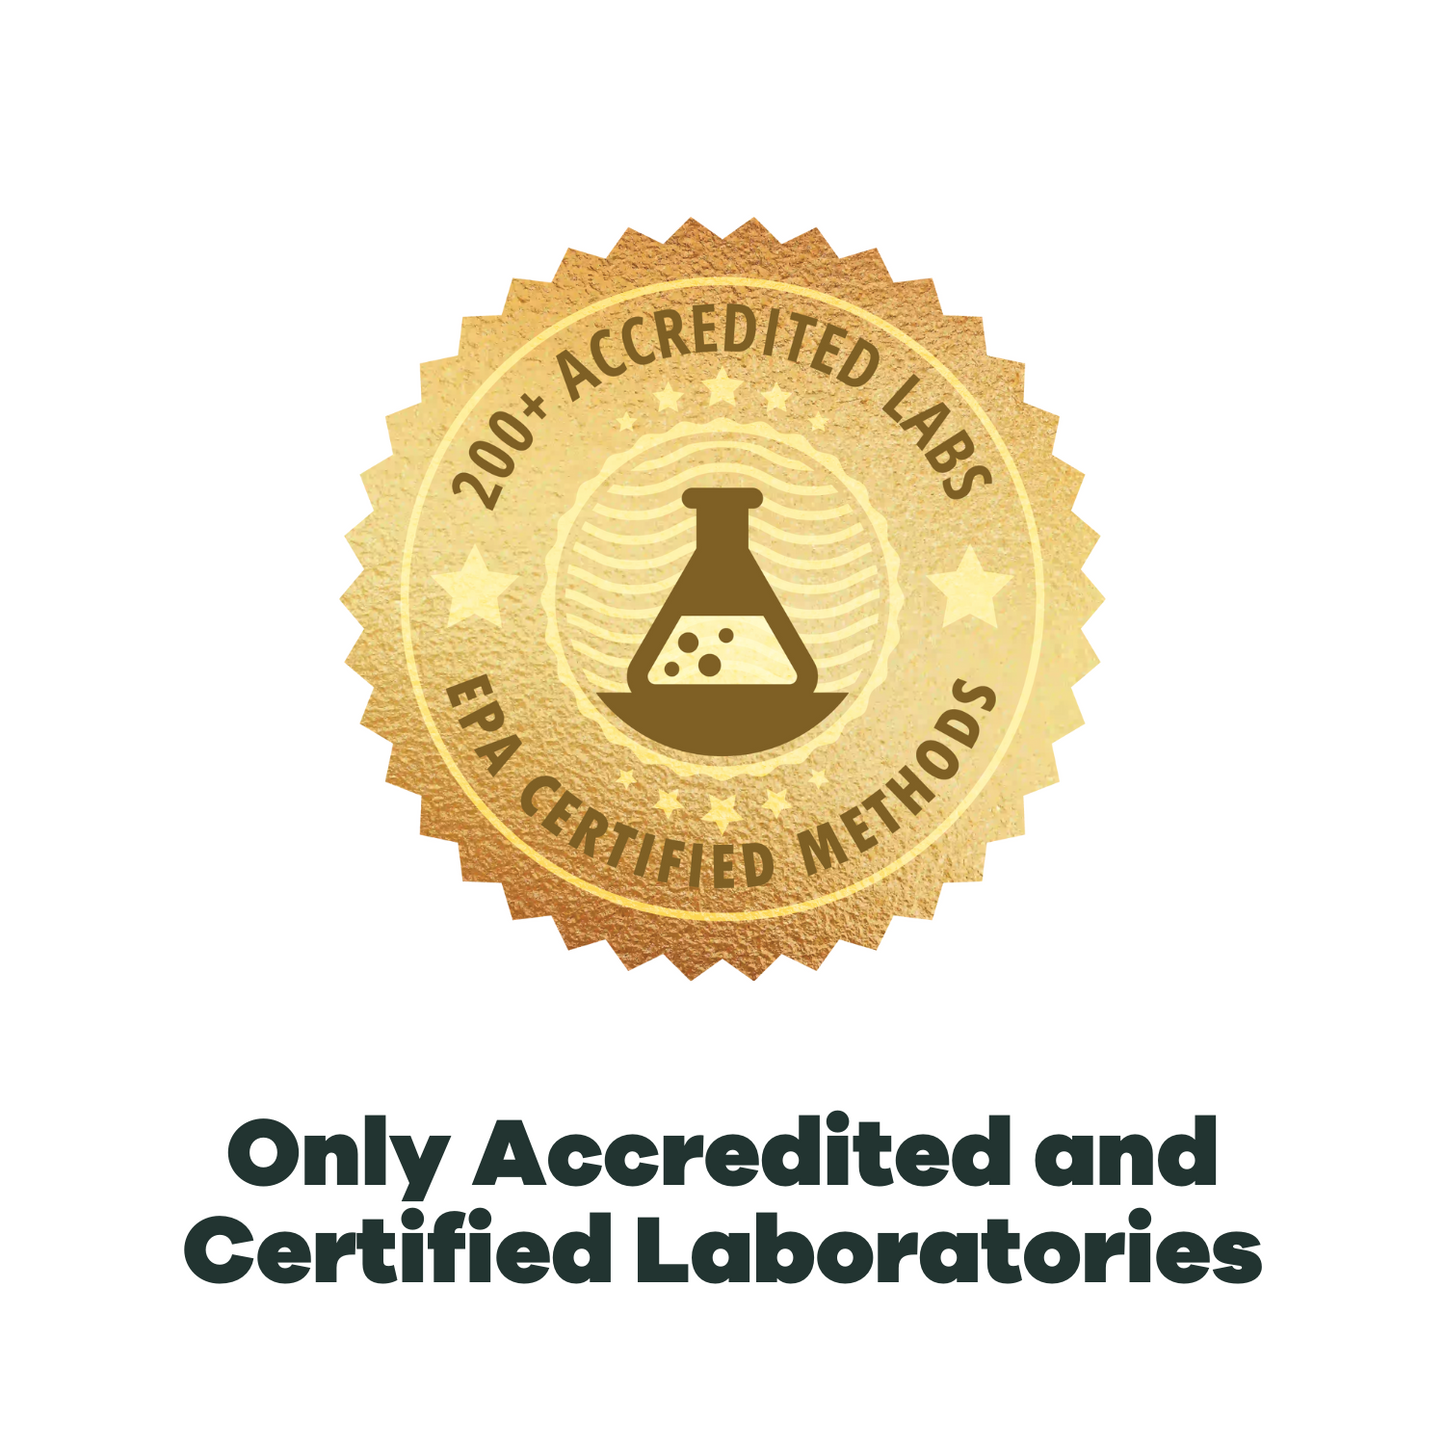 Only accredited and certified labs